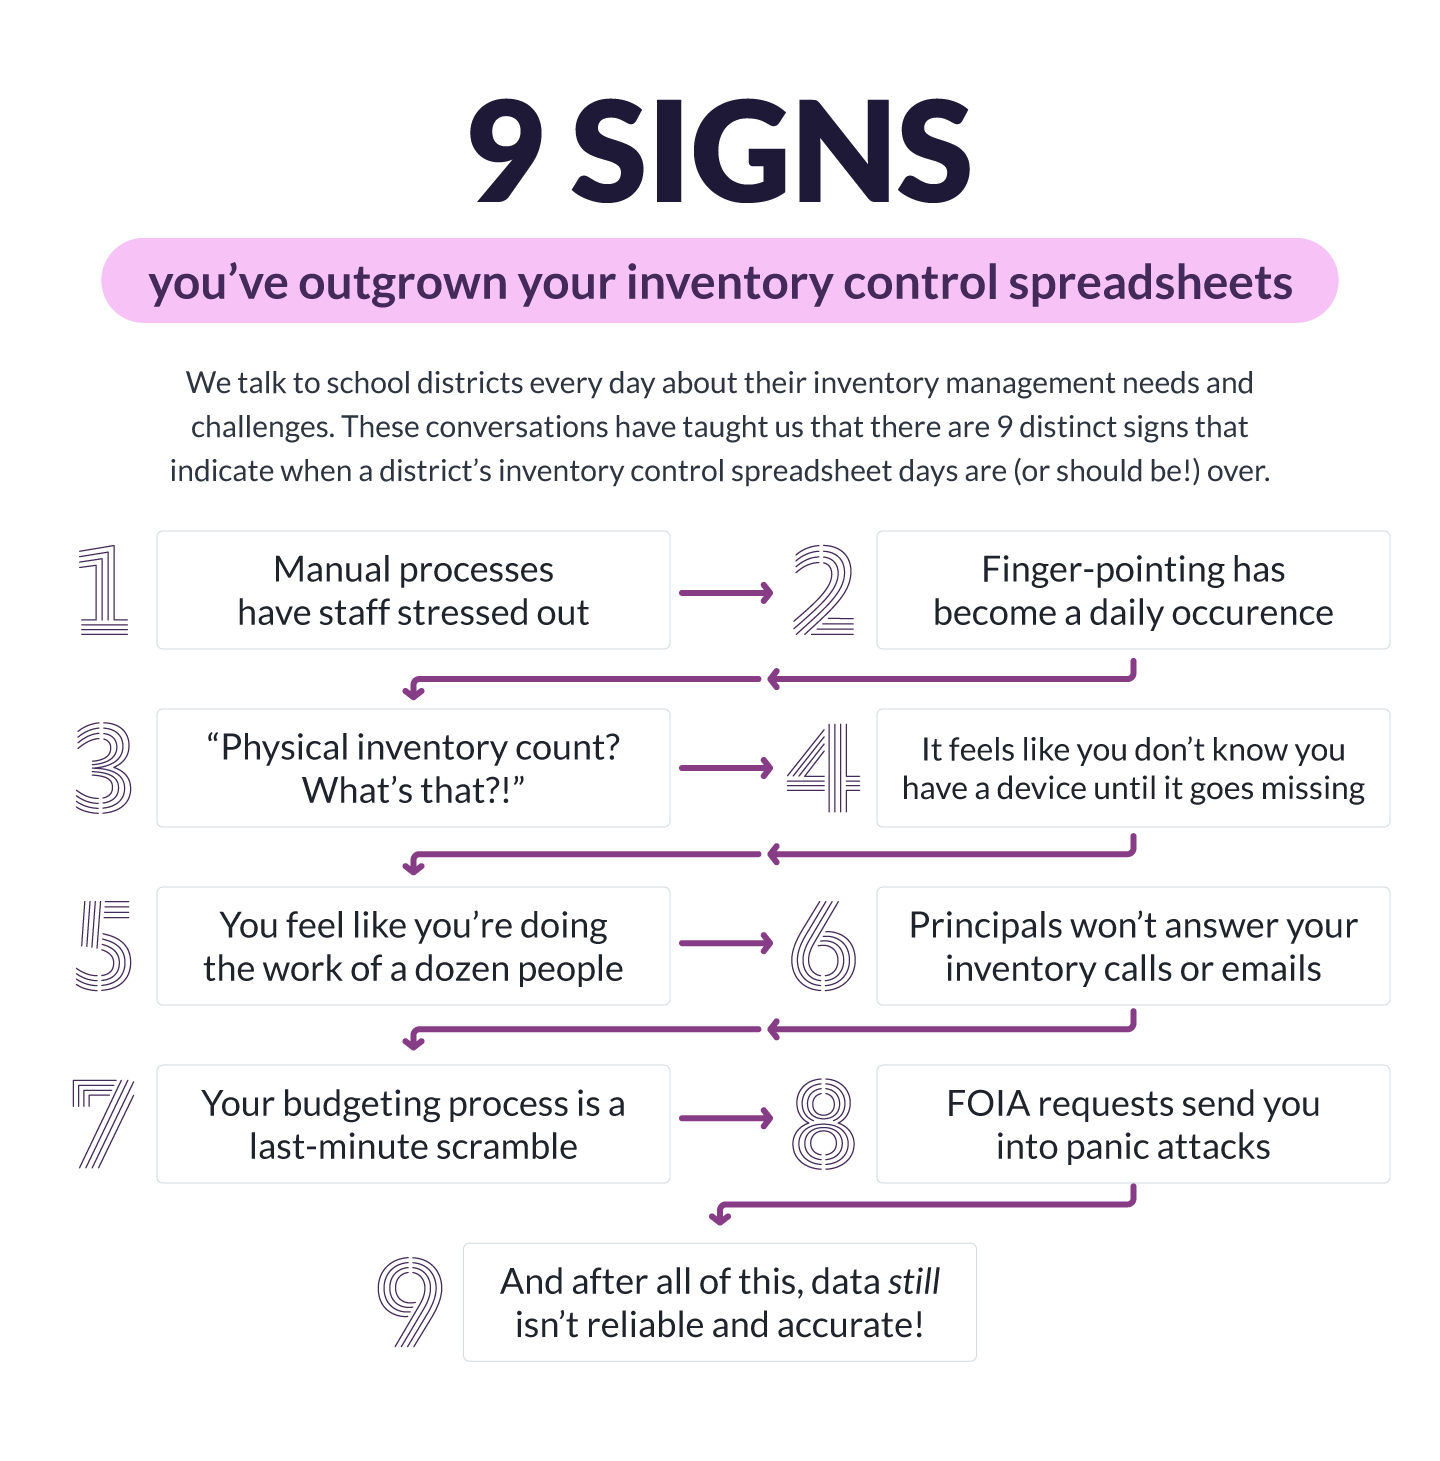 9 Signs You've Outgrown your Inventory Control Spreadsheets Infographic